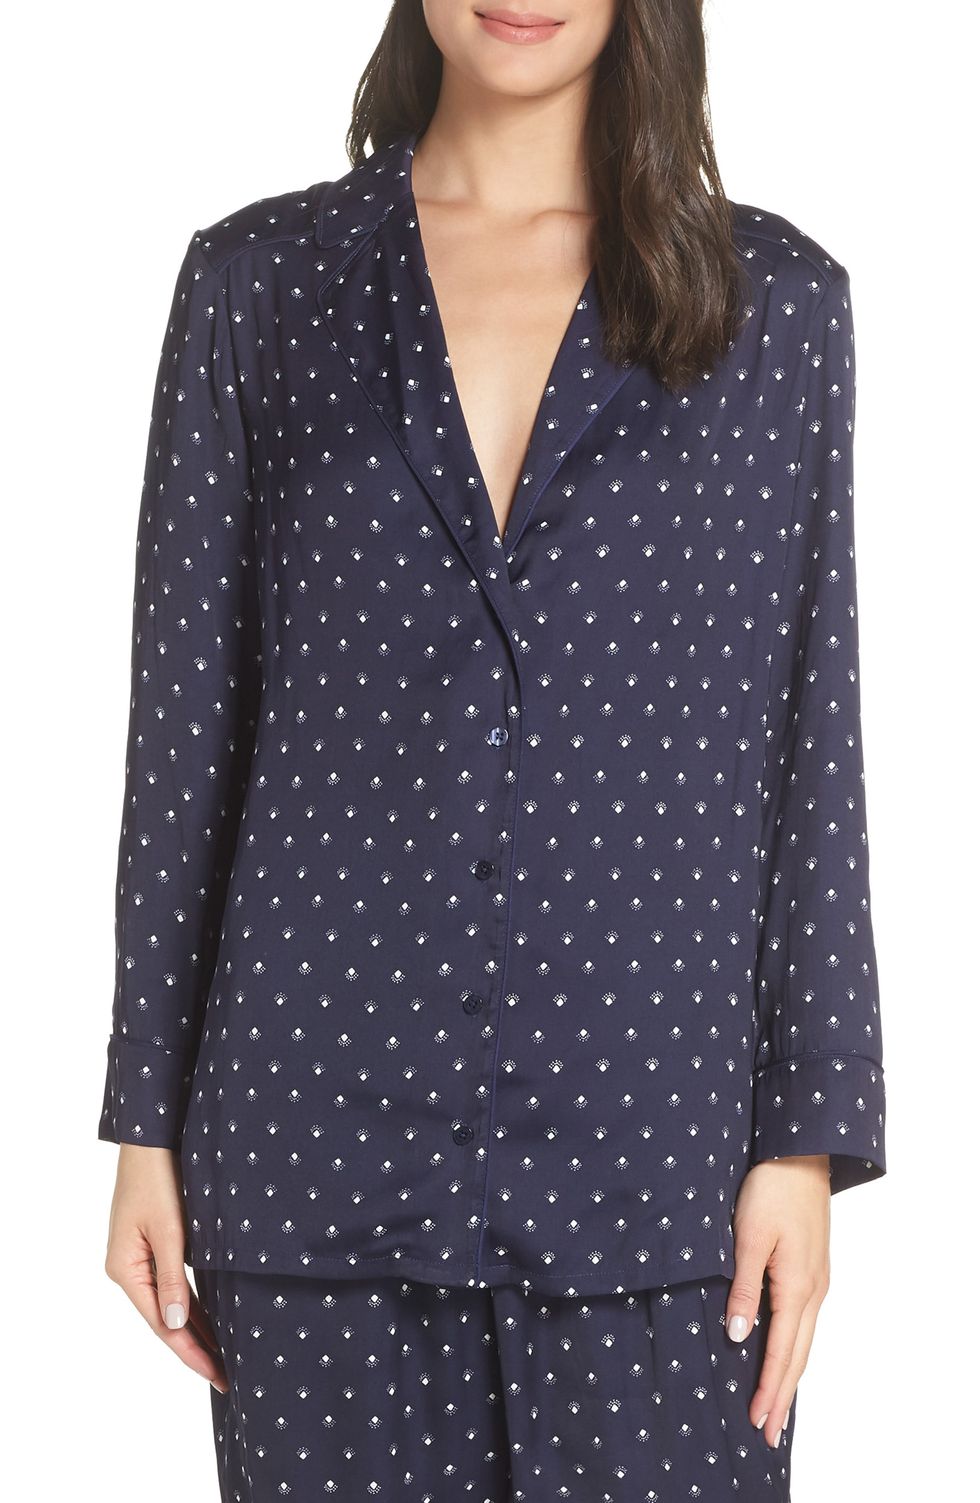 Something Navy's Latest Nordstrom Collection Is Selling Out Fast - Shop ...